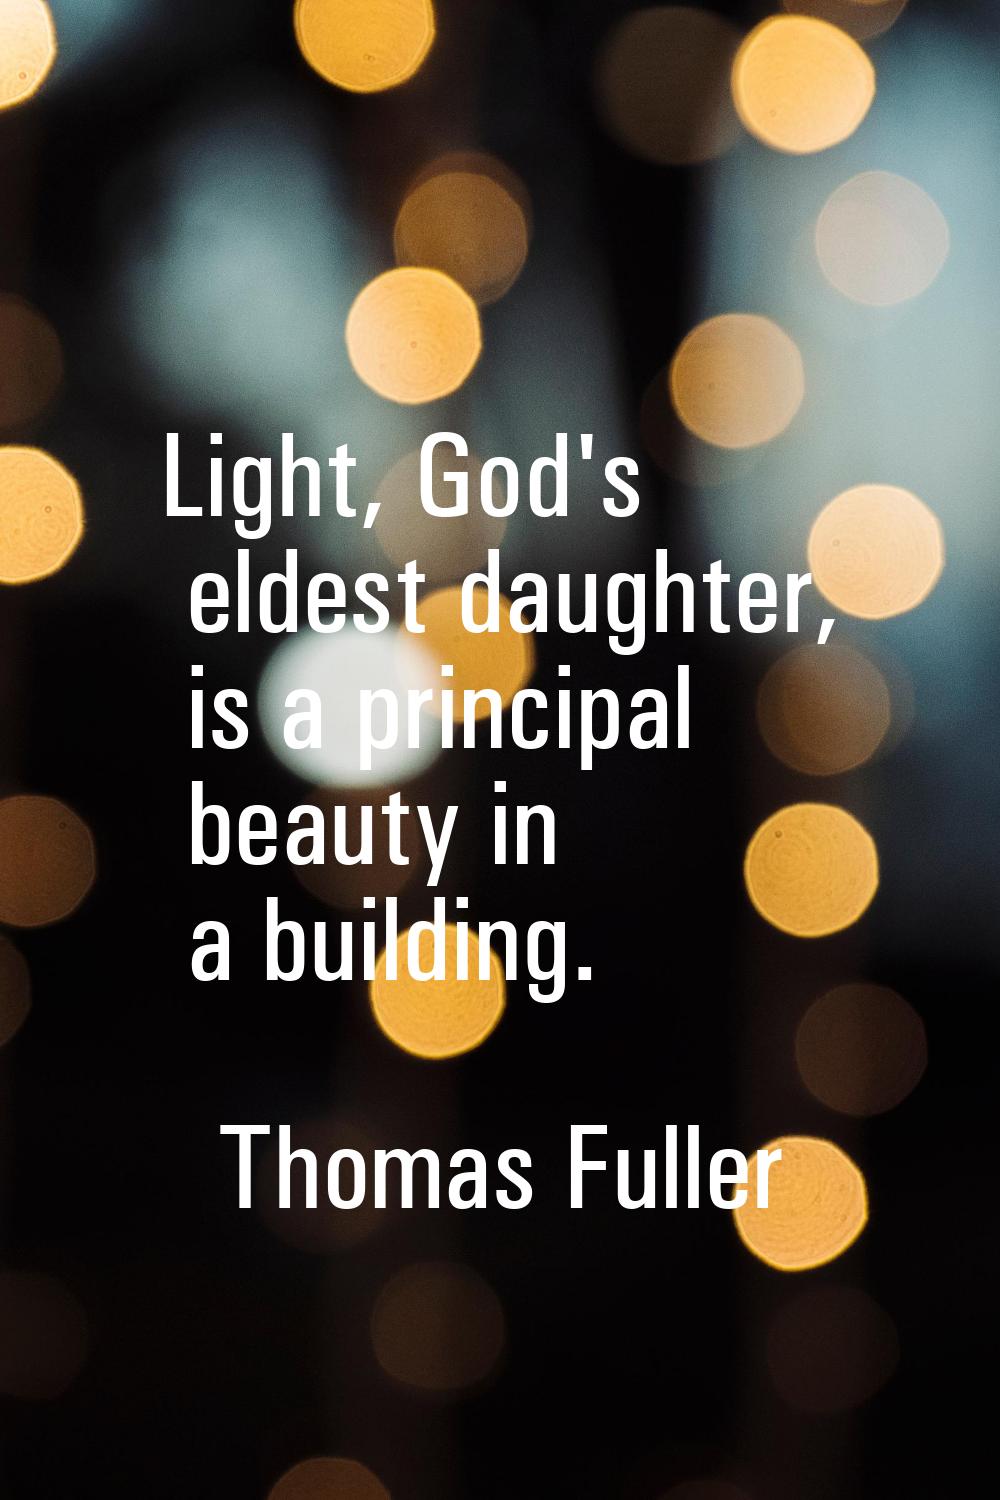 Light, God's eldest daughter, is a principal beauty in a building.